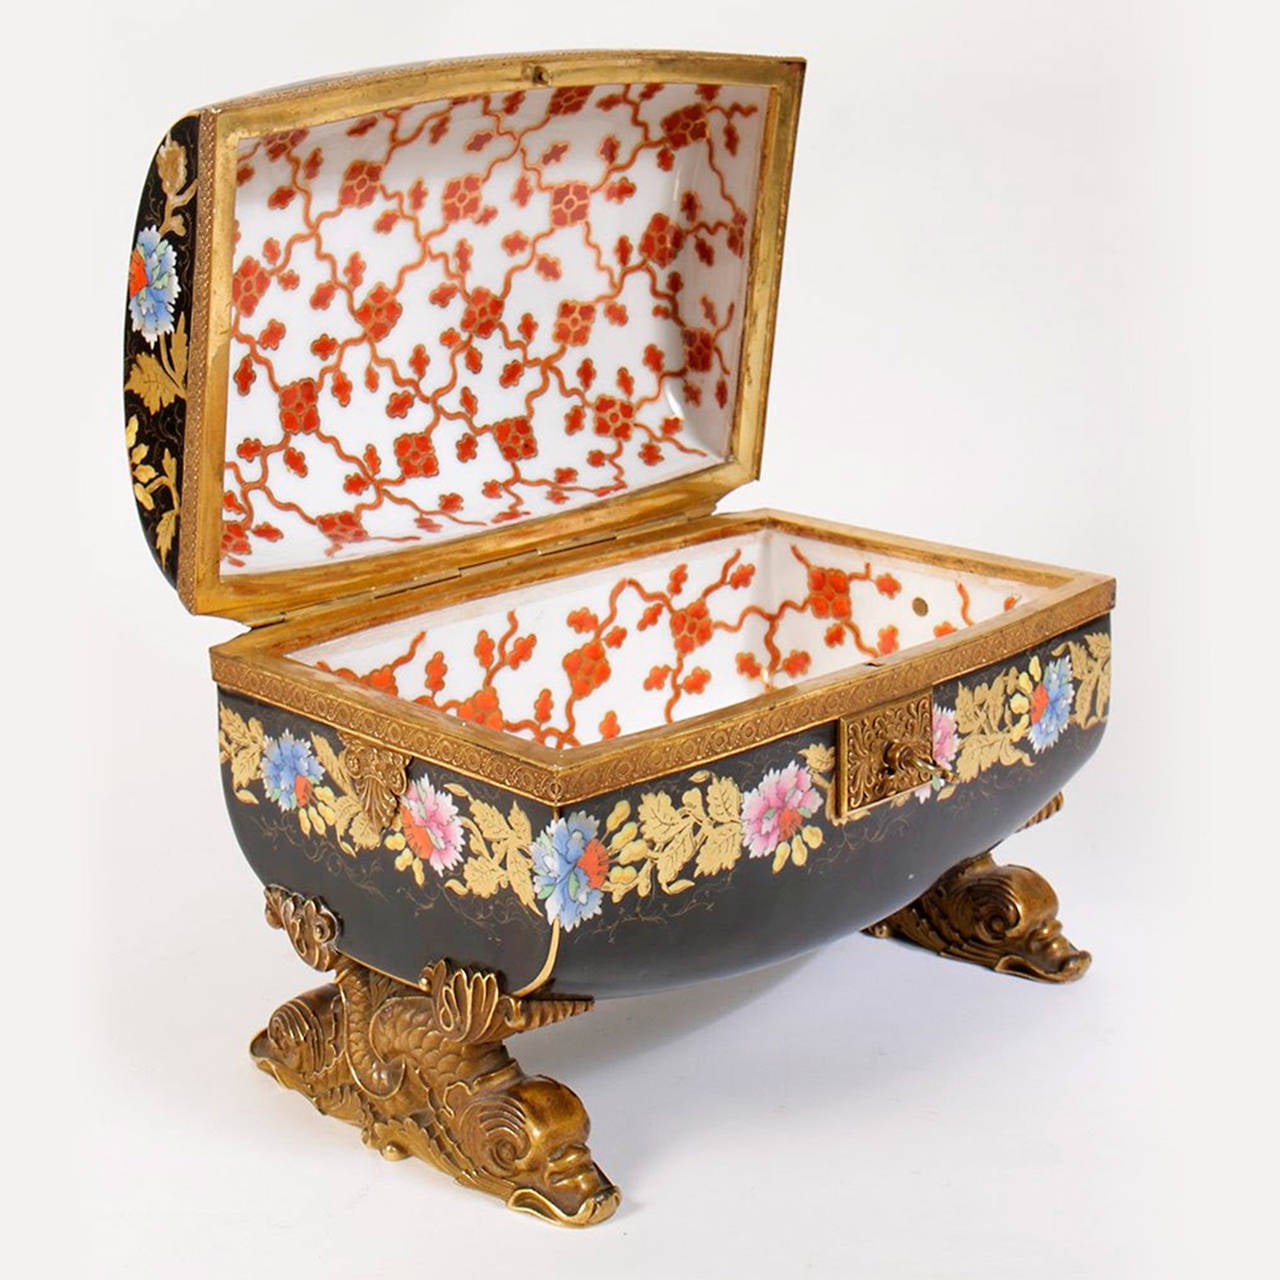 An exquisite faux cloisonné bronze-mounted porcelain box or jewelry casket with key, decorated with peonies and gilt vines on bronze figural legs.
Stock number: DA43.